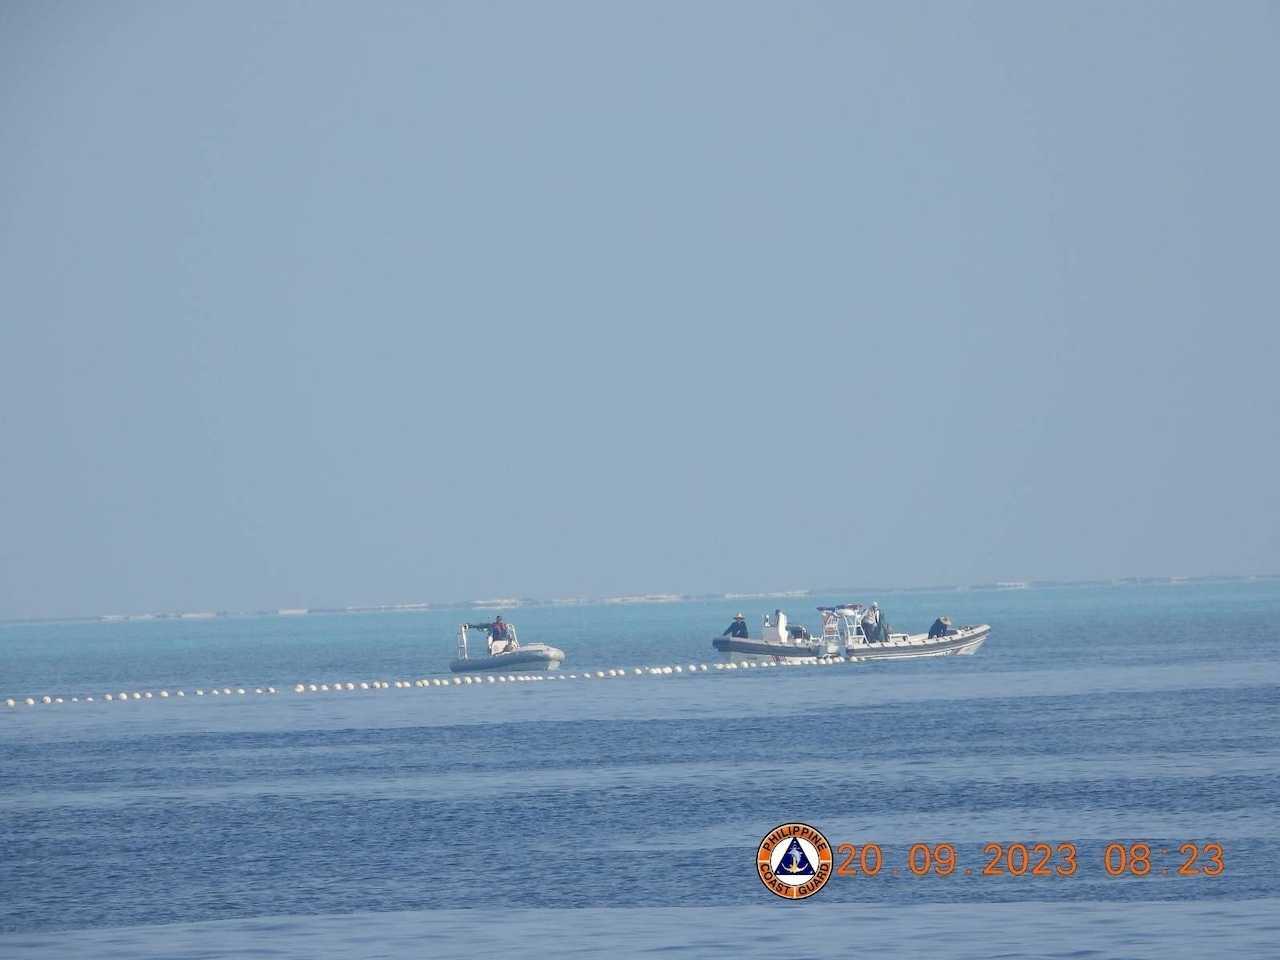 Chinese Coast Guard boats close to a floating barrier on Sept 20, near the Scarborough Shoal in the South China Sea, in this handout image released by the Philippine Coast Guard on Sept 24. Photo: Reuters